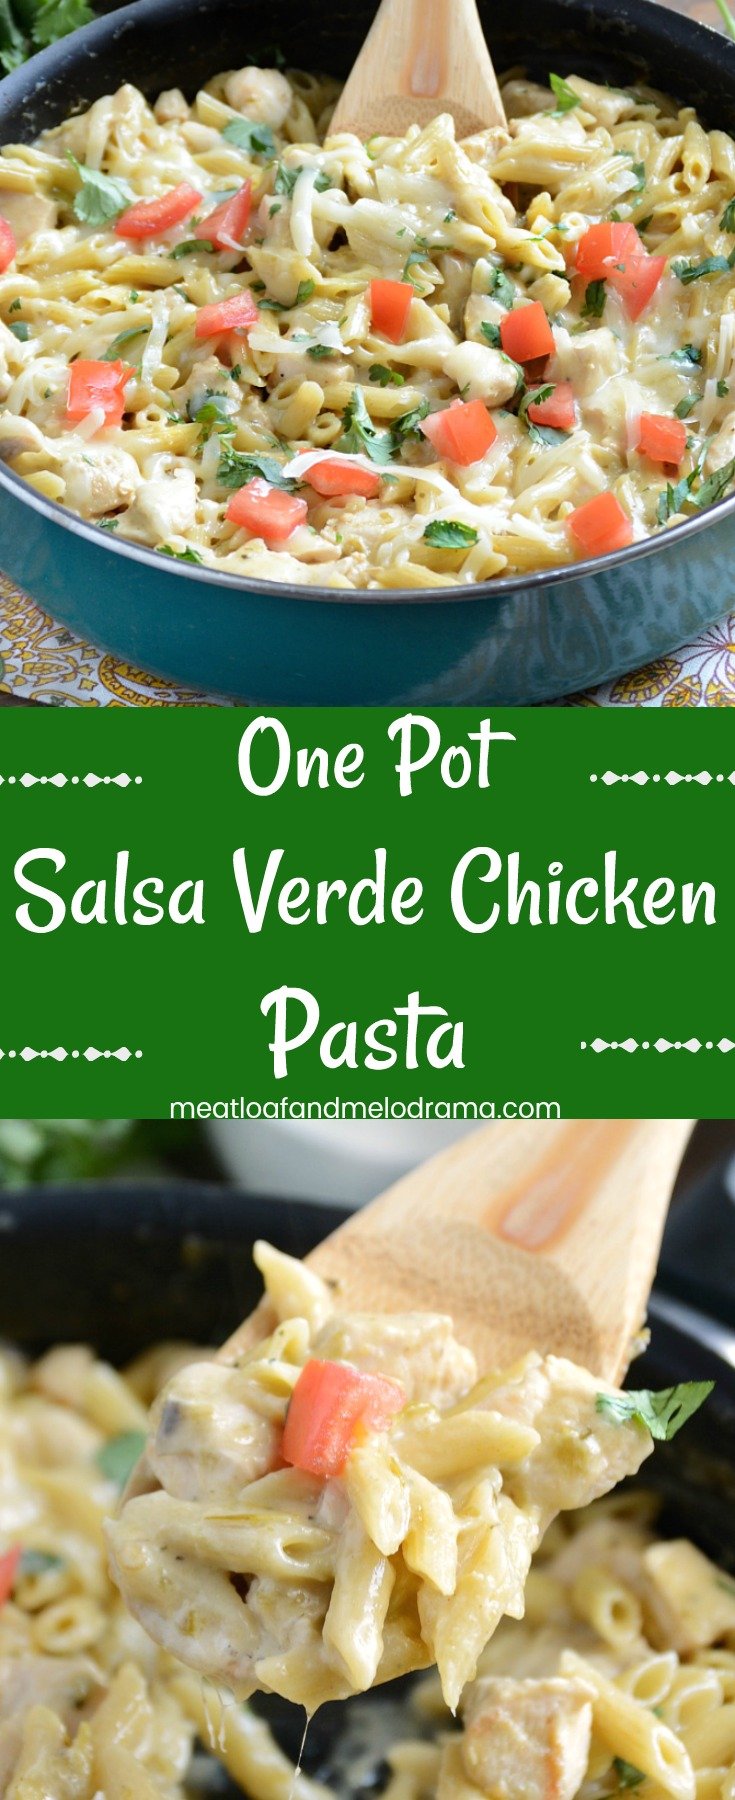 One Pot Salsa Verde Chicken Pasta - A quick and easy 30 minute dinner made with chicken, pasta and cheese in a creamy green chile sauce. Super easy clean up, too!